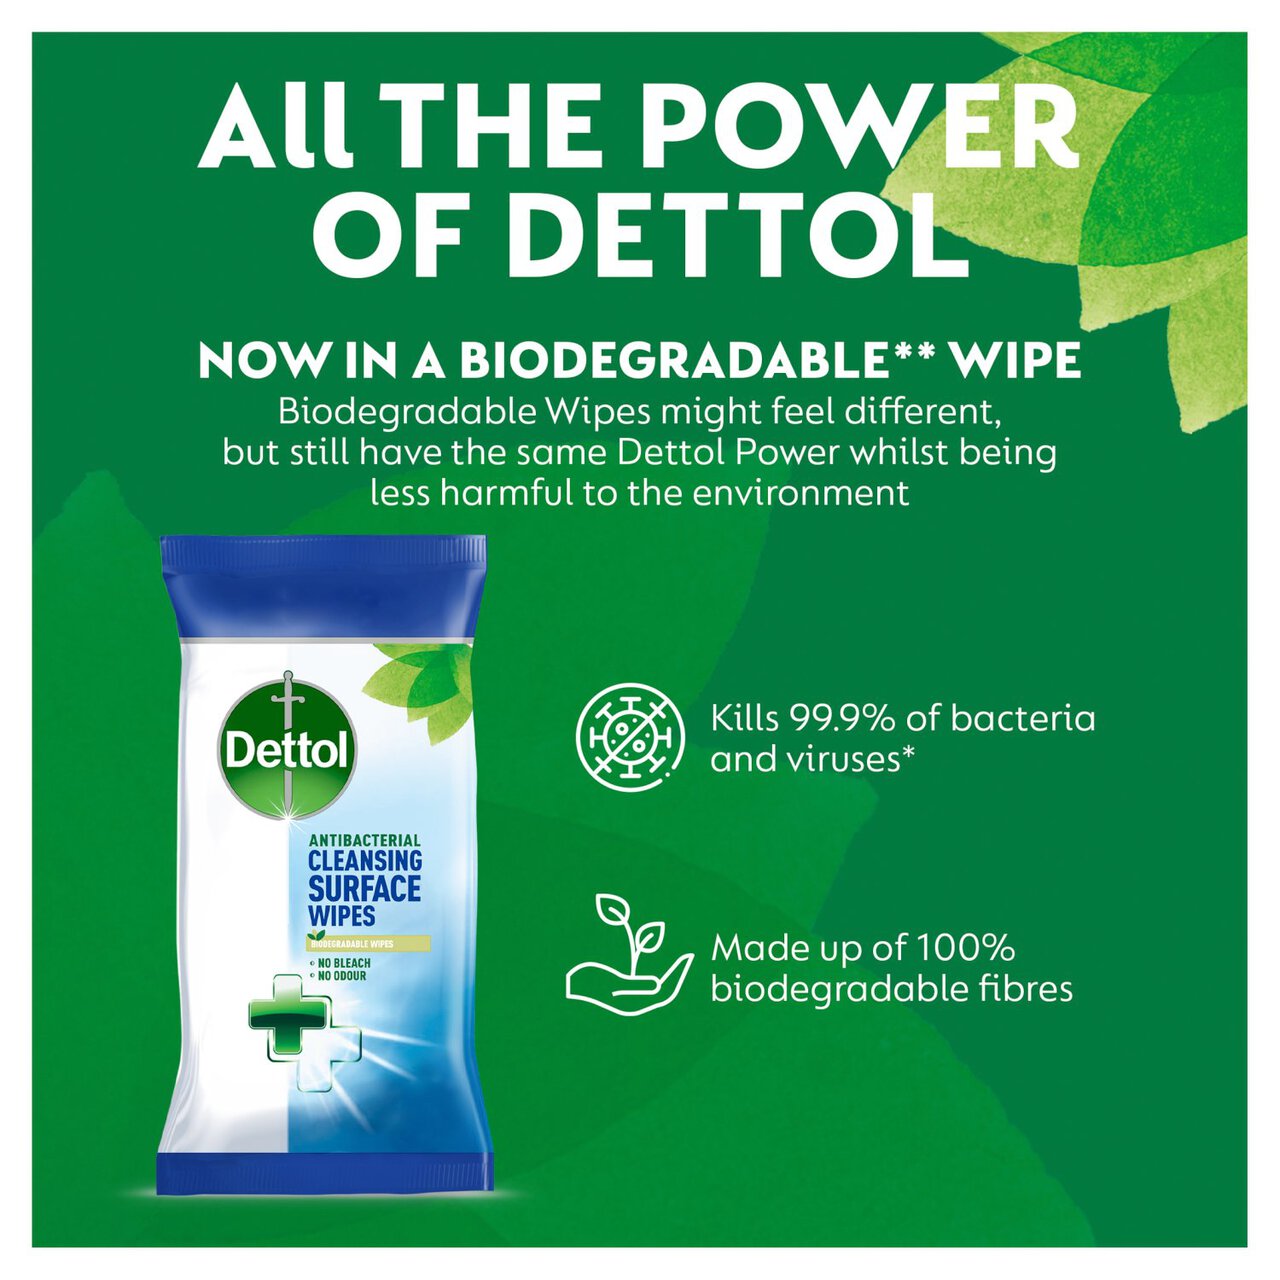 Dettol Antibacterial Multi Surface Cleaning Wipes 126 per pack